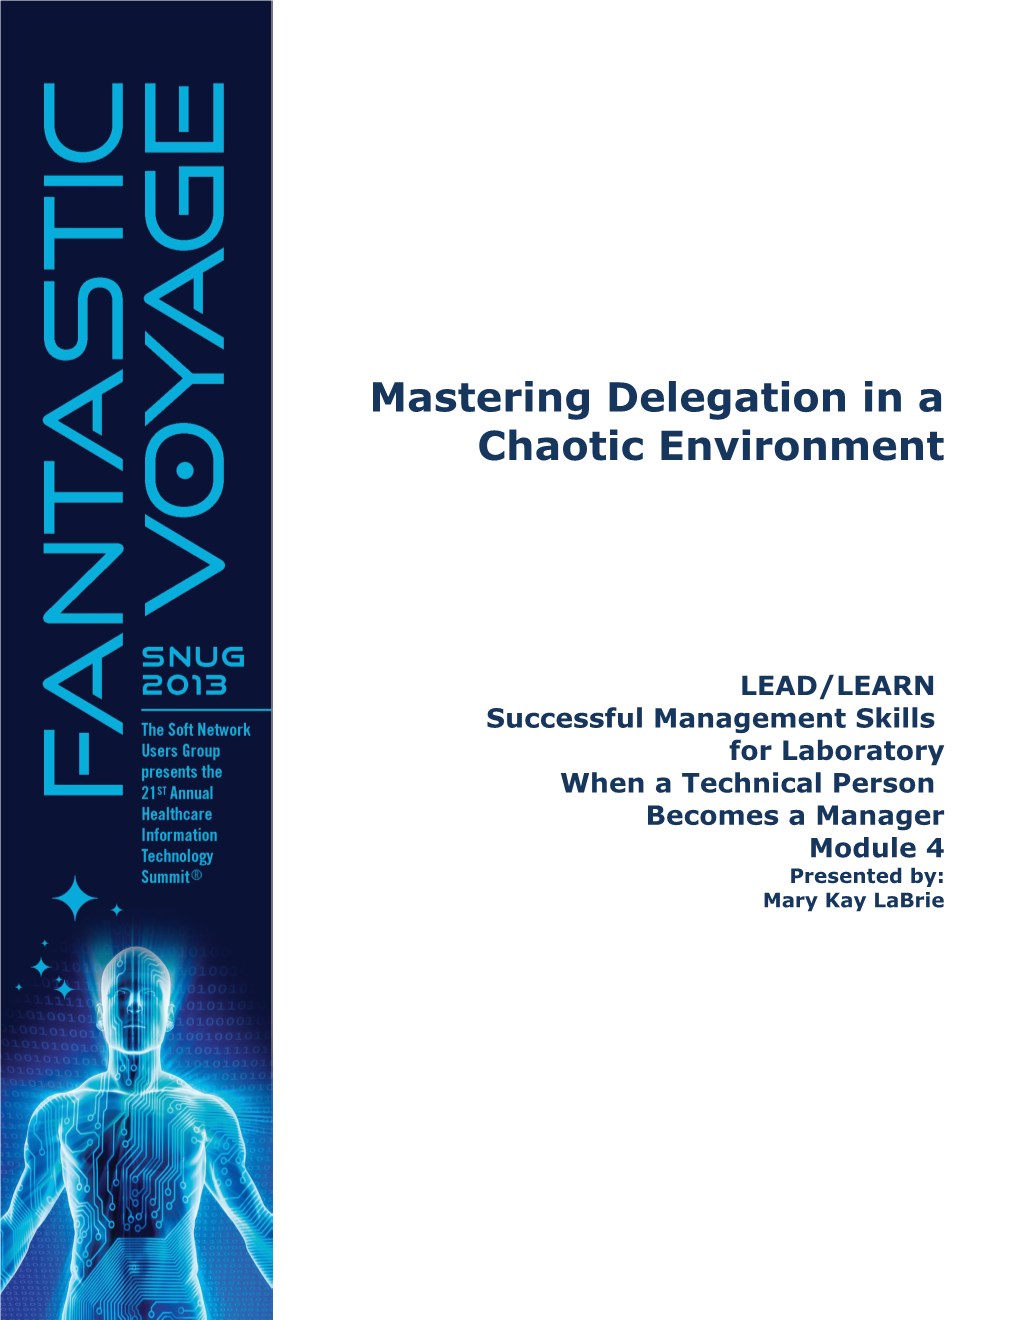 Mastering Delegation in a Chaotic Environment